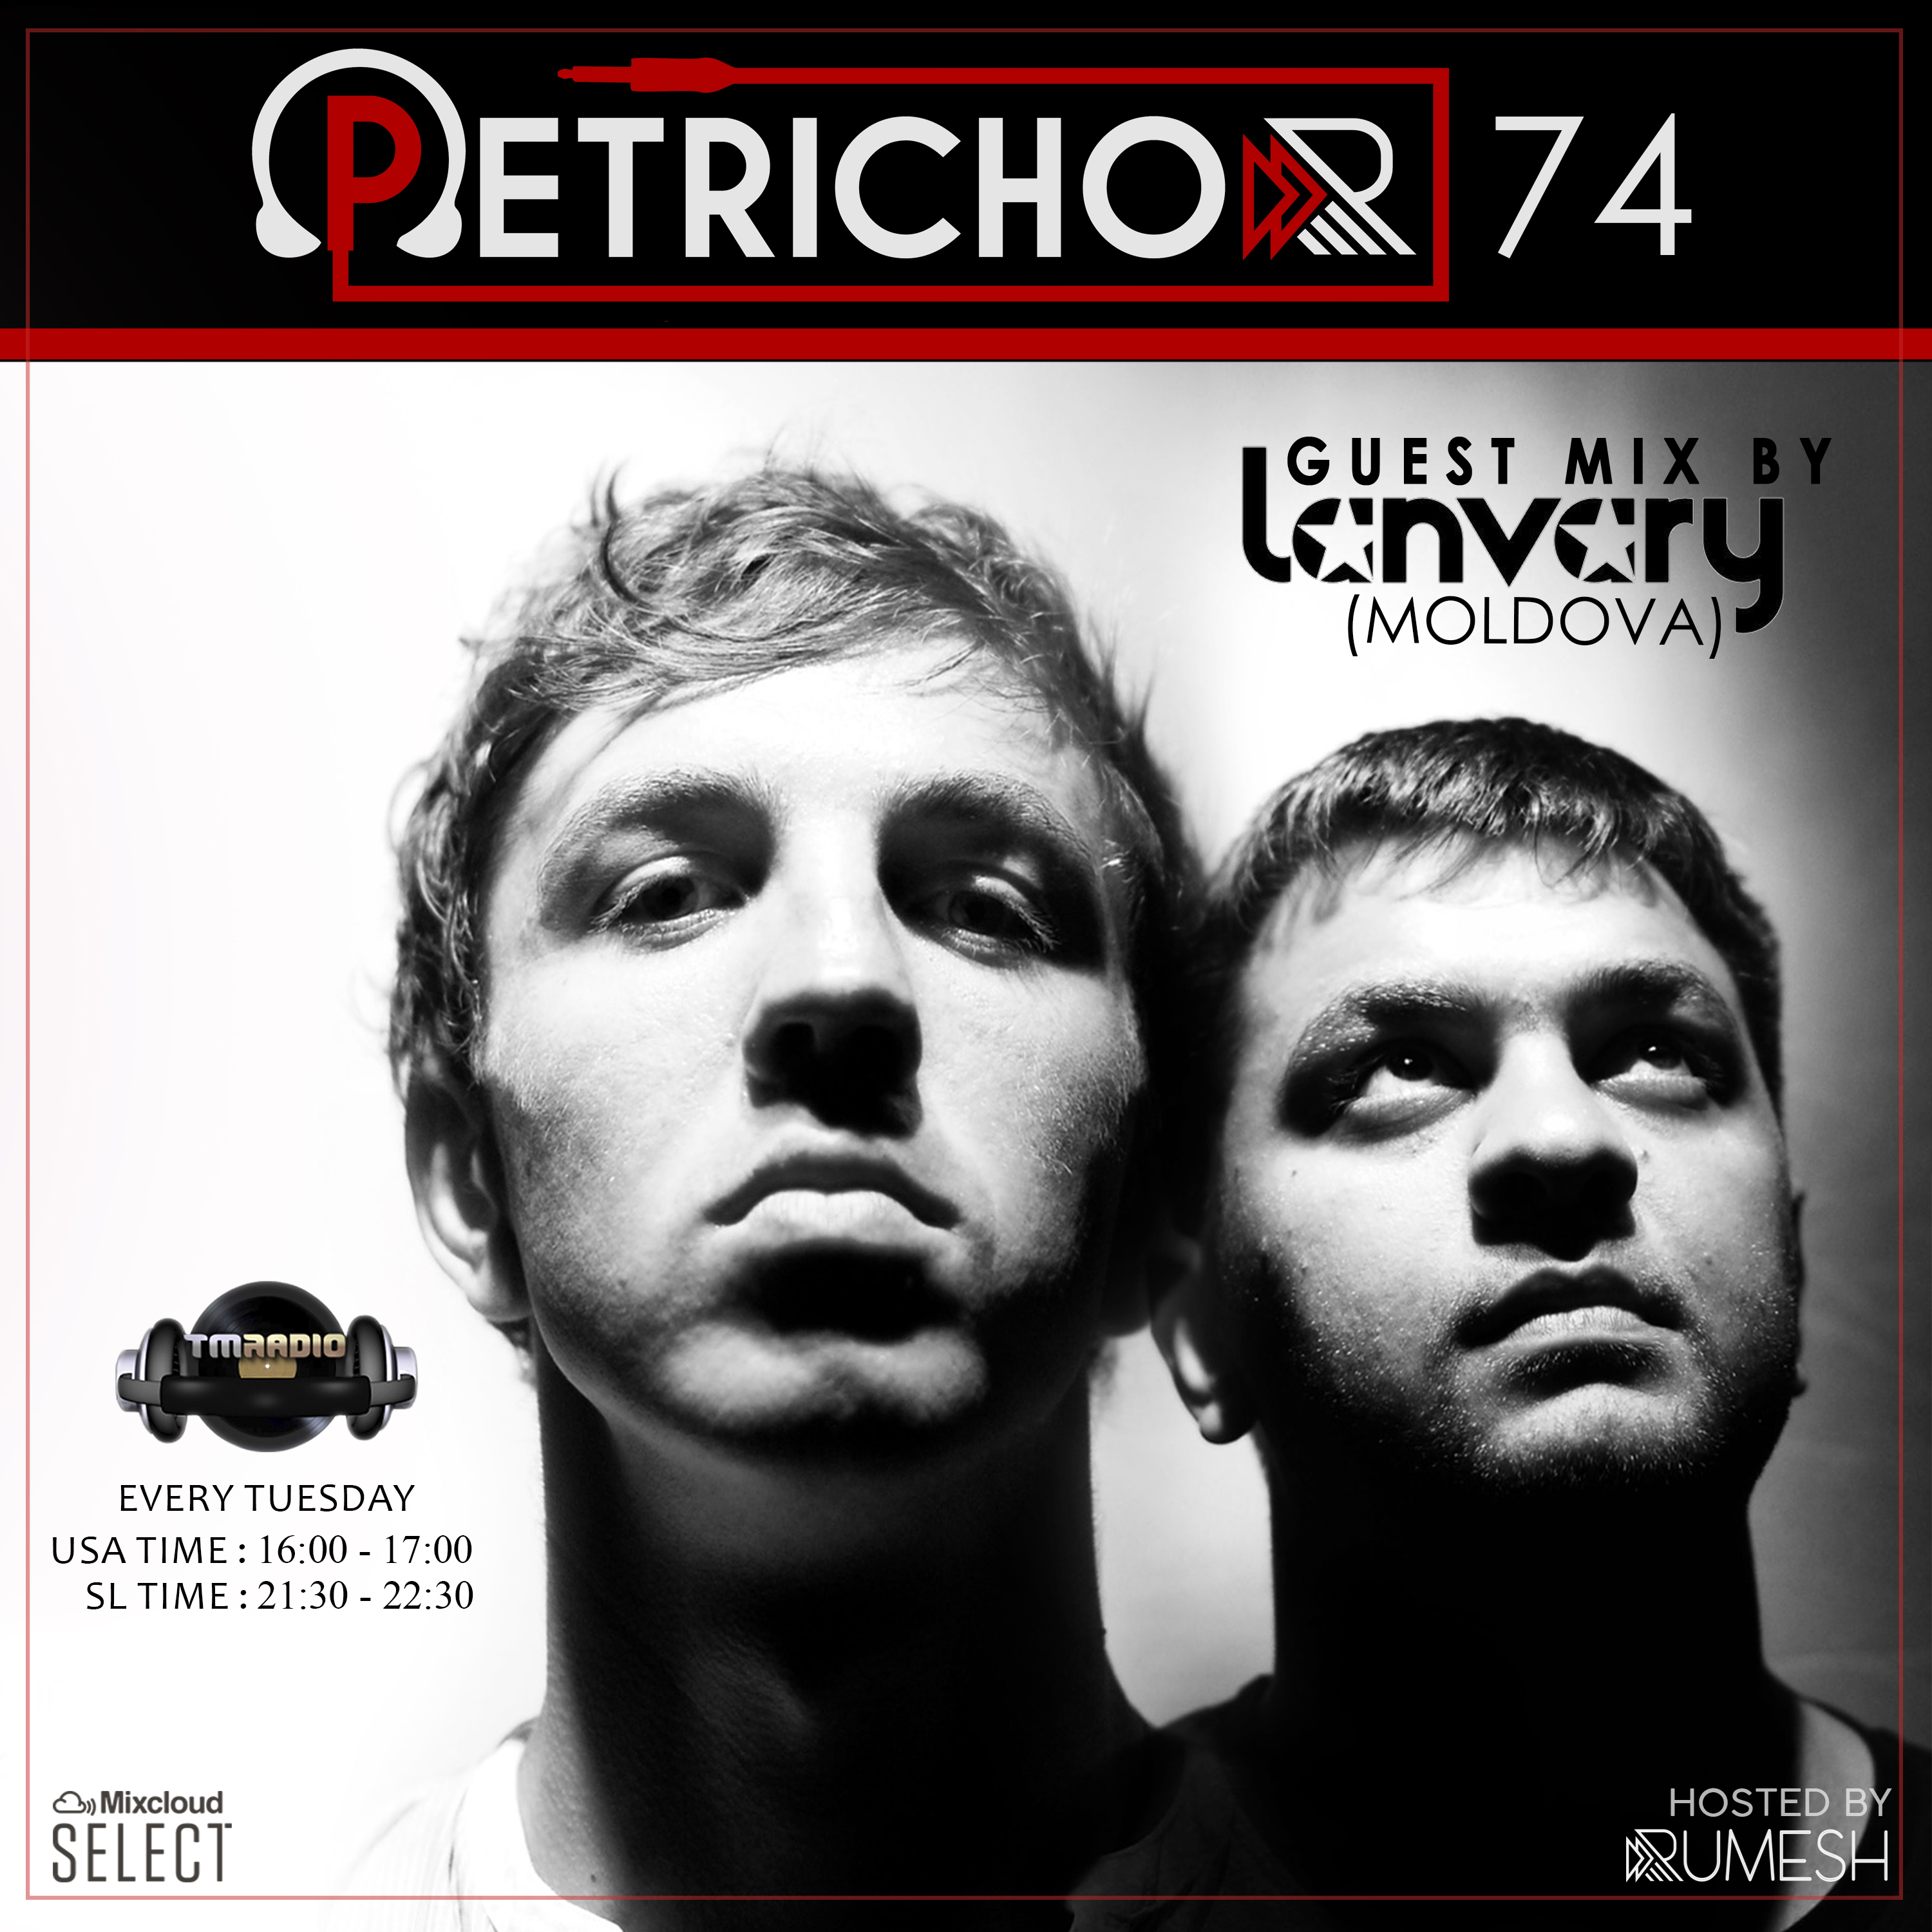 Petrichor :: Petrichor 74 Guest Mix by Lanvary (Moldova) (aired on April 7th, 2020) banner logo